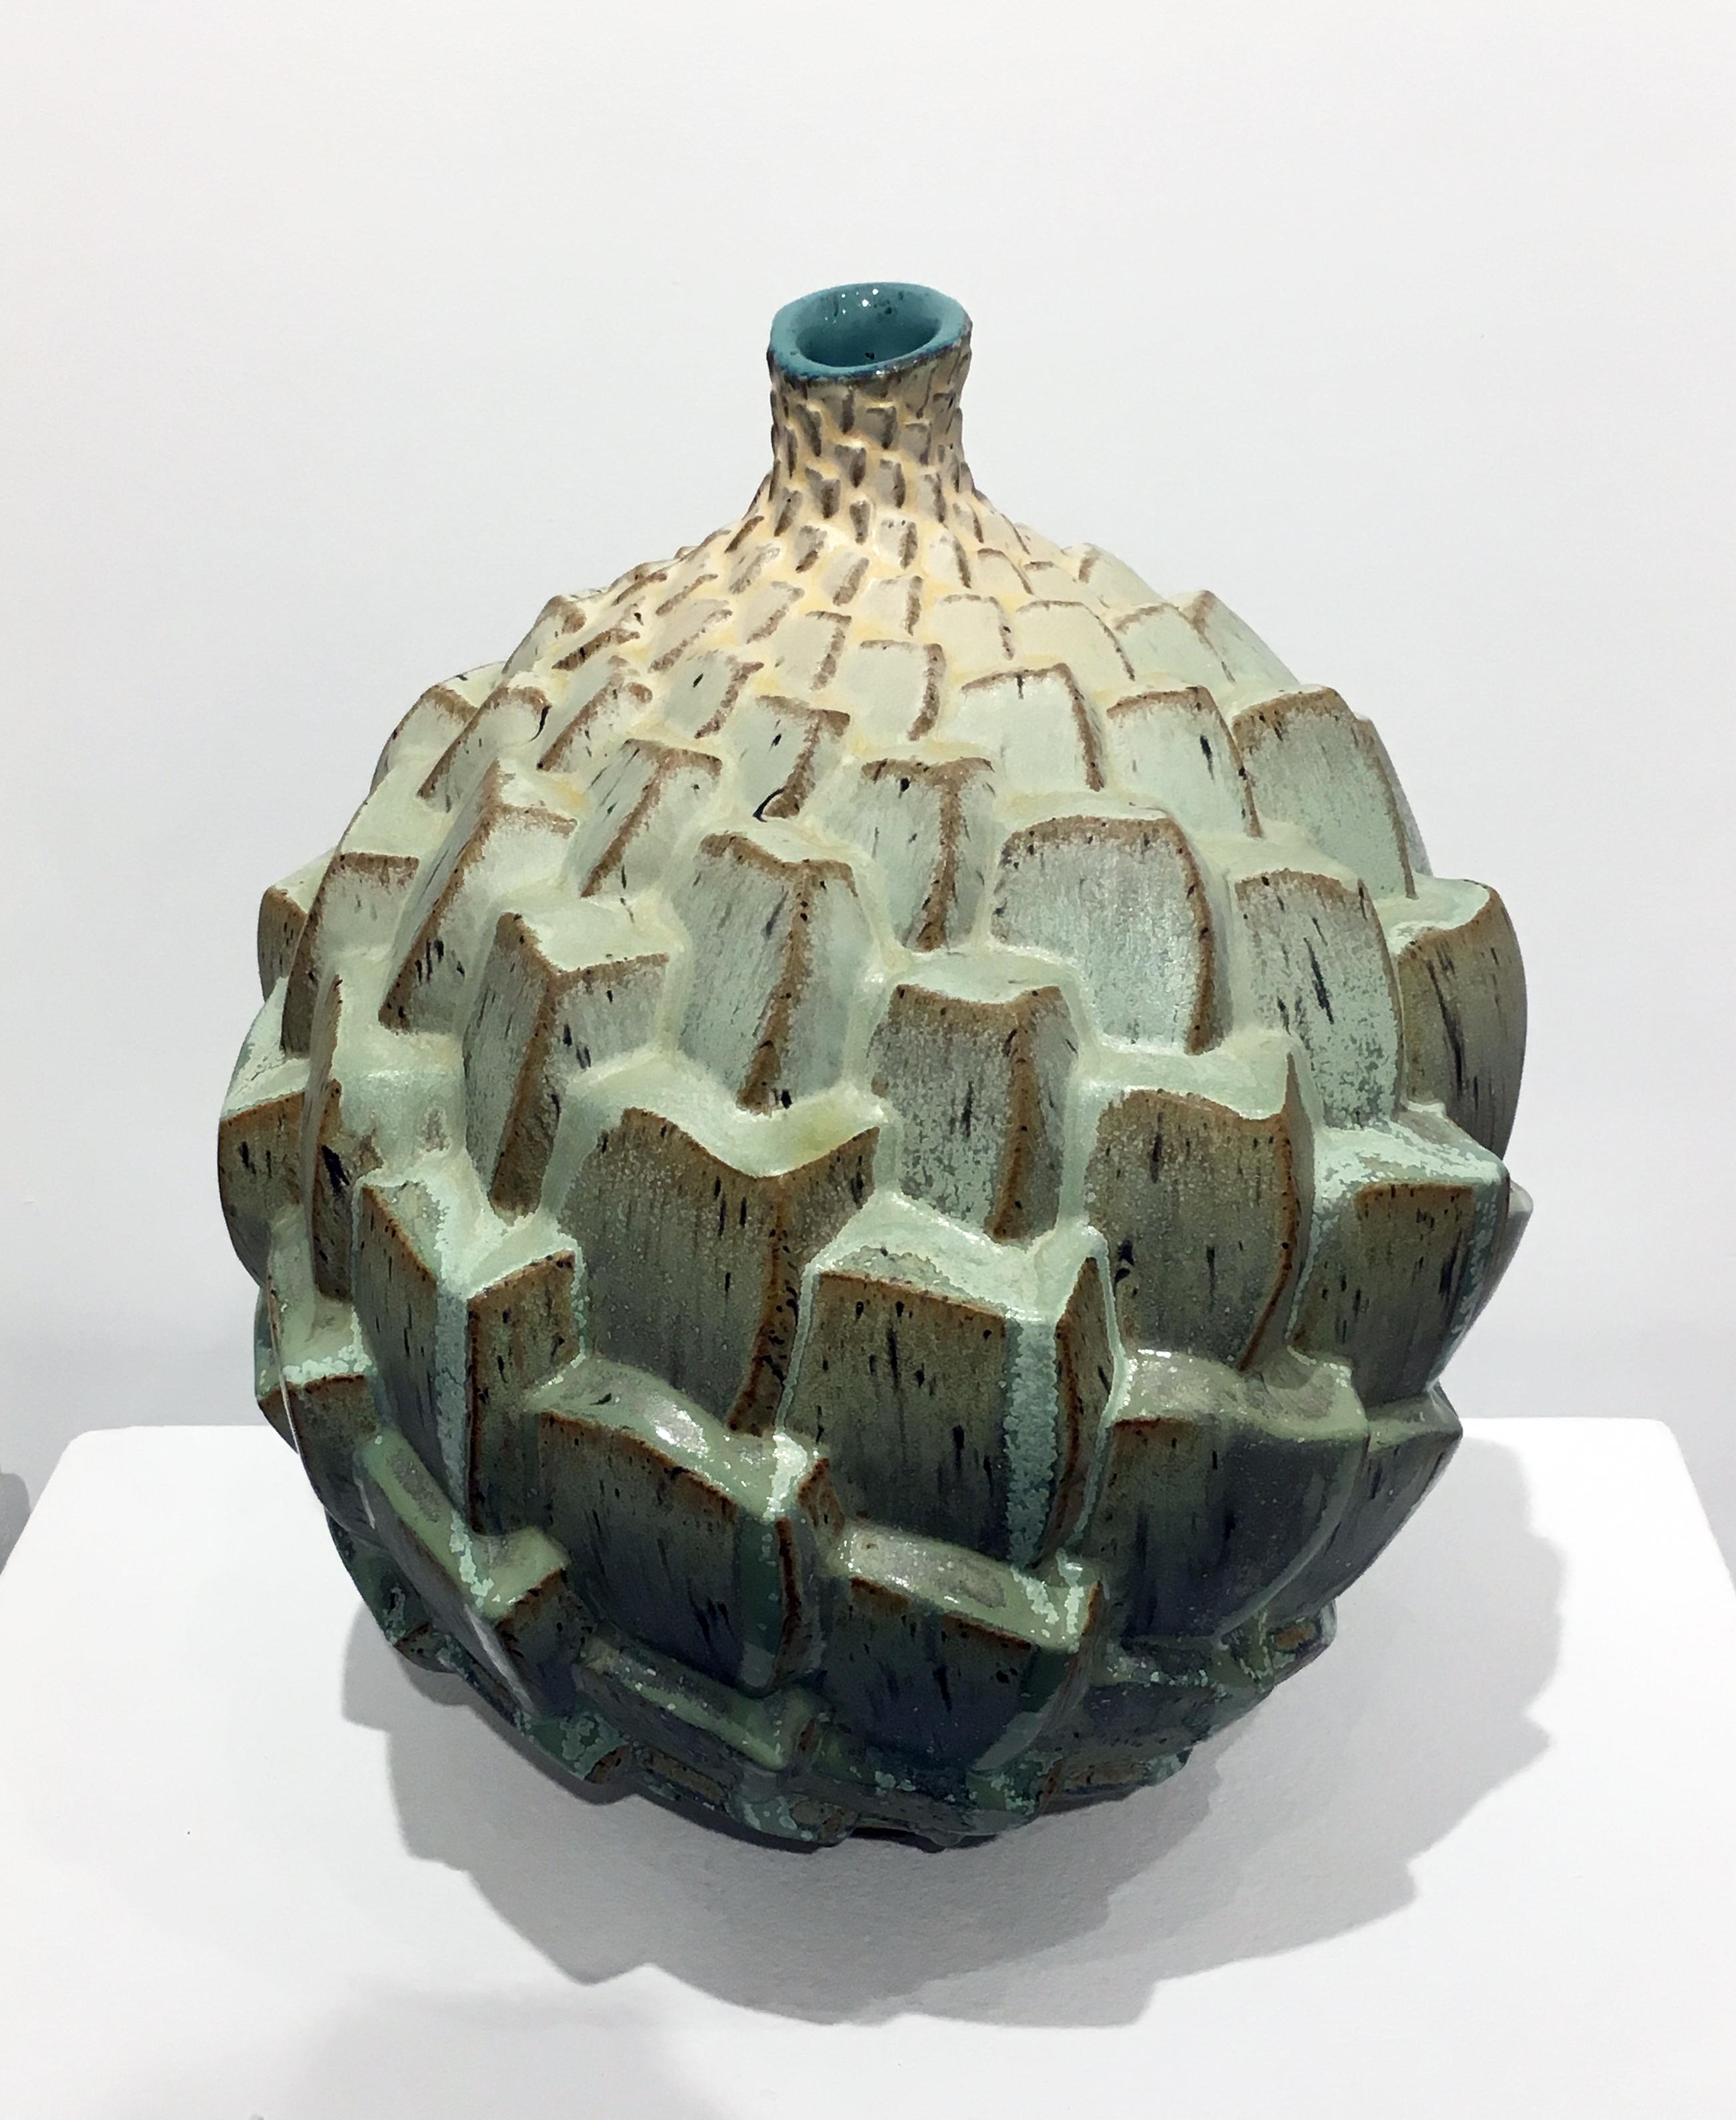 Autumnal Equinox 02, Stoneware Ceramic Sculpture with Repeating Pattern, Glaze - Gray Abstract Sculpture by Judith Ernst